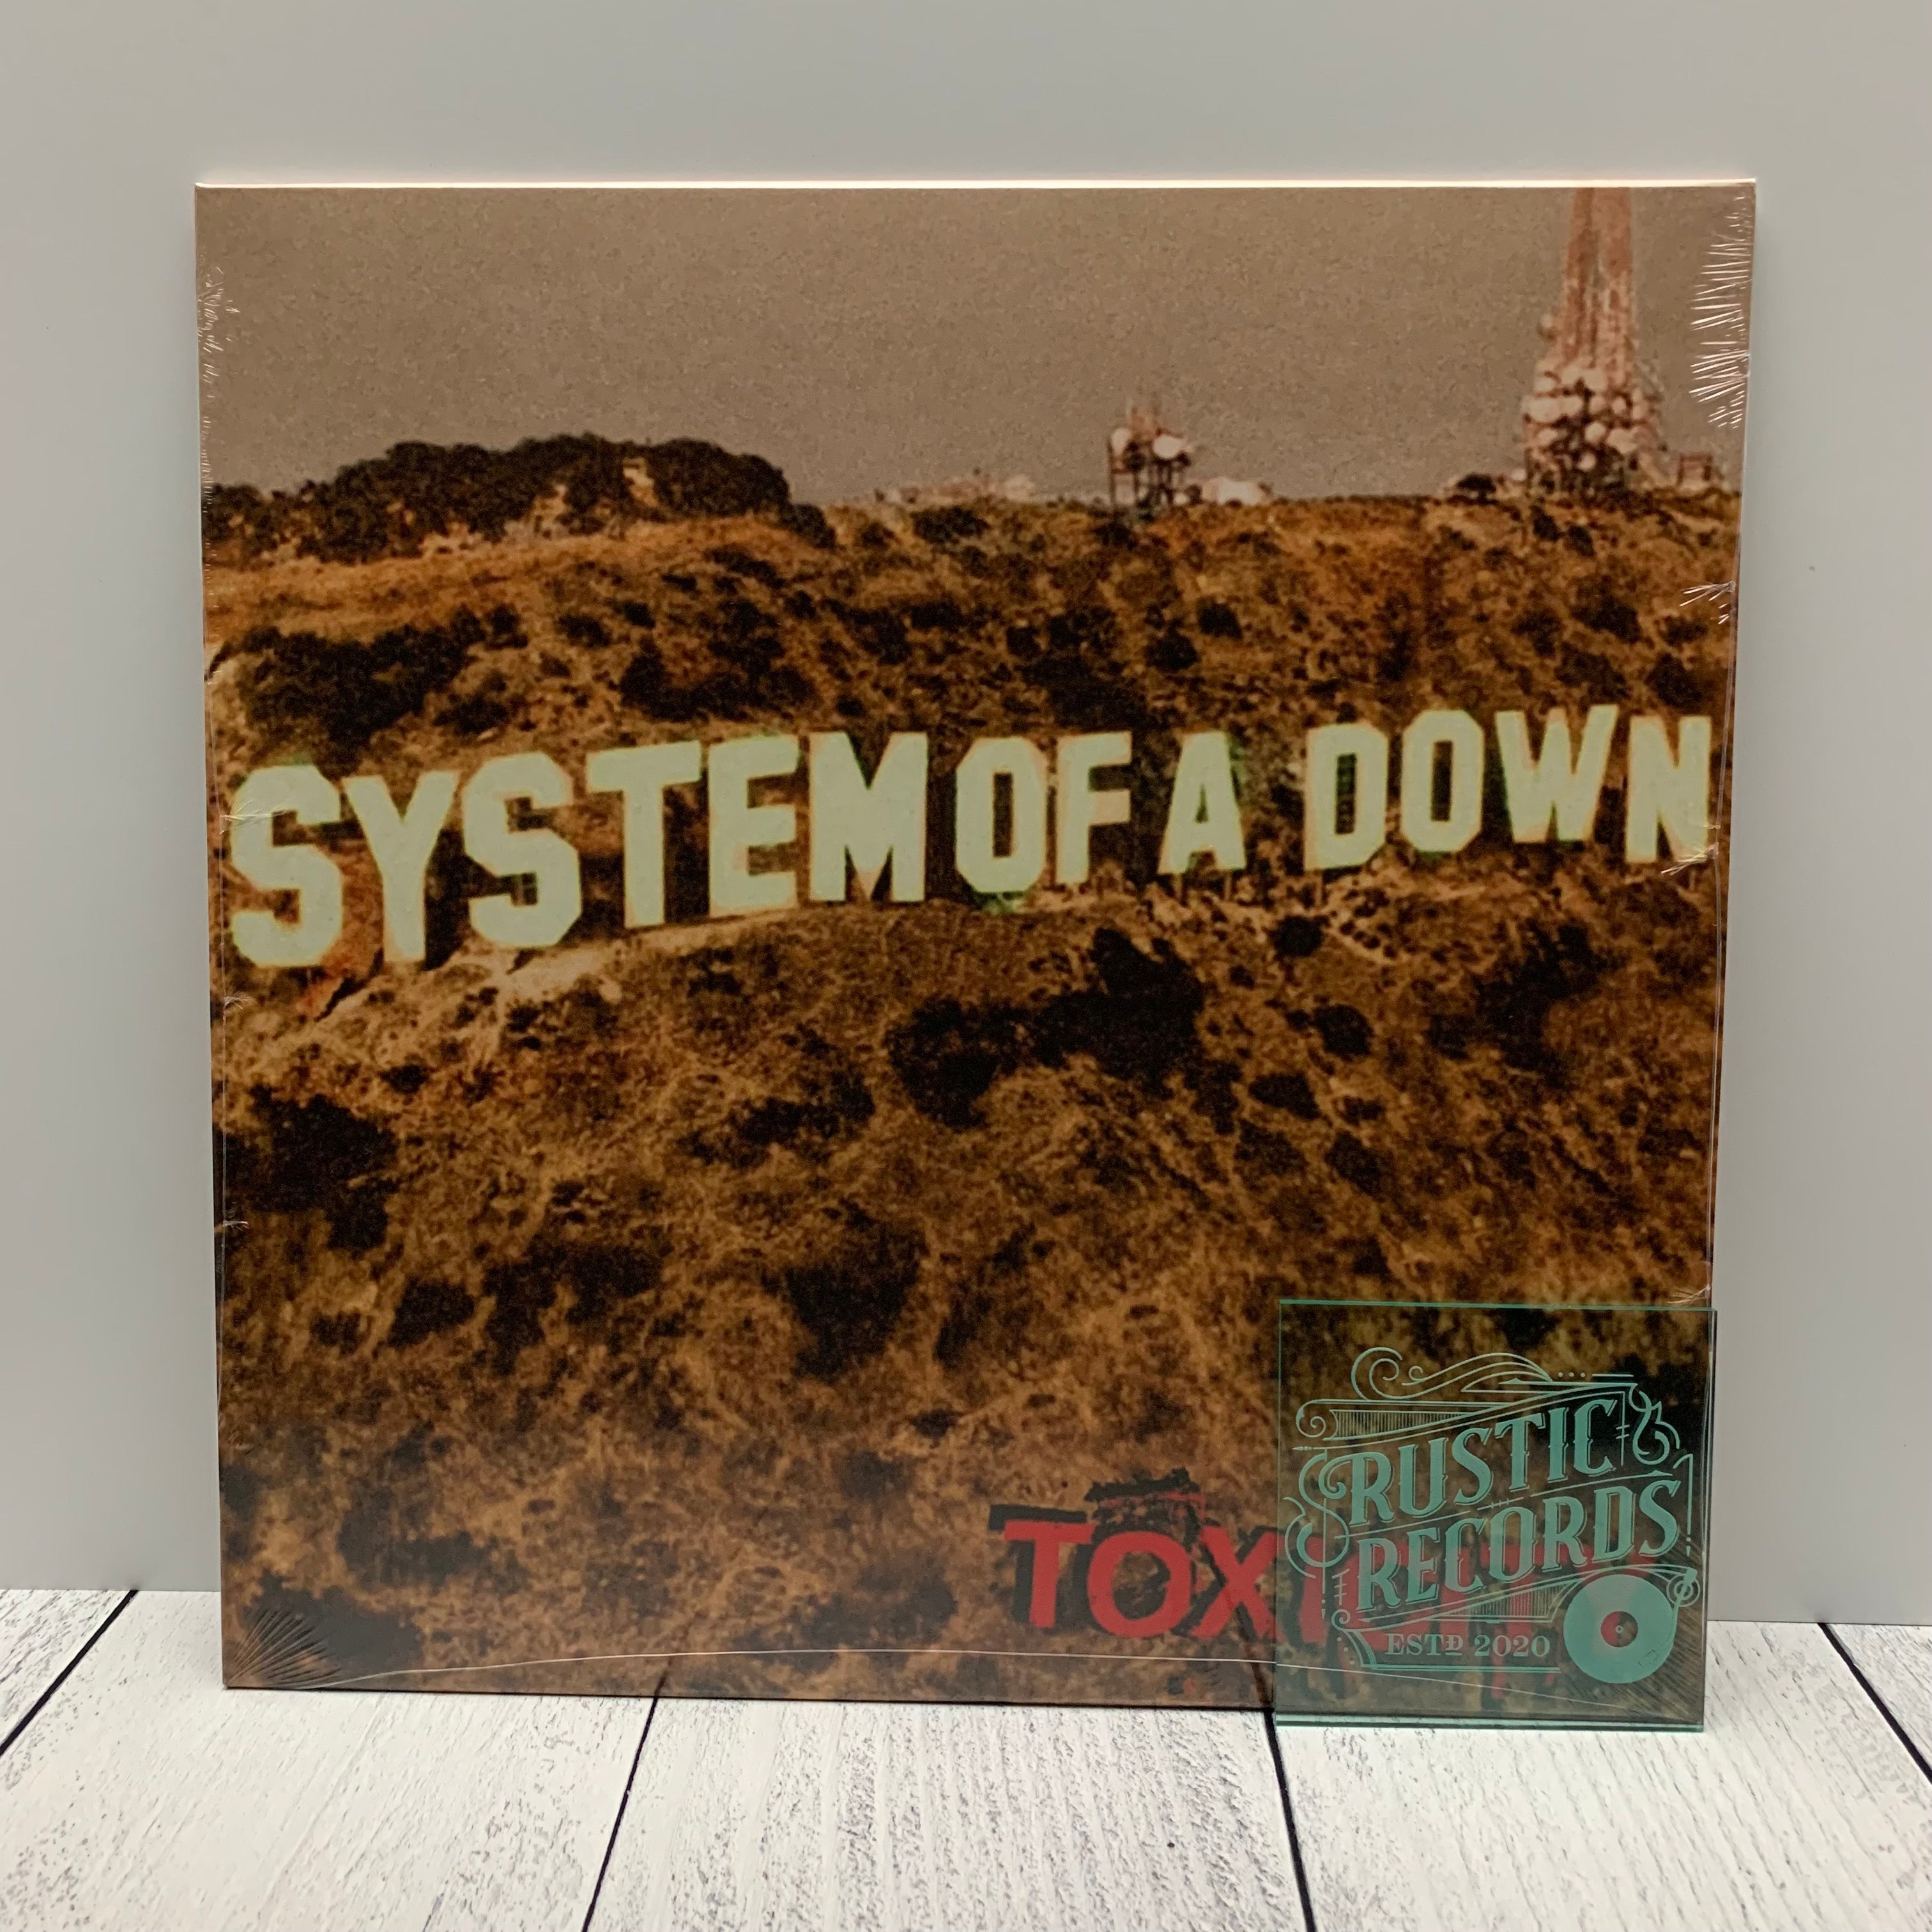 System of a Down Almost Broke Up While Recording Toxicity for a